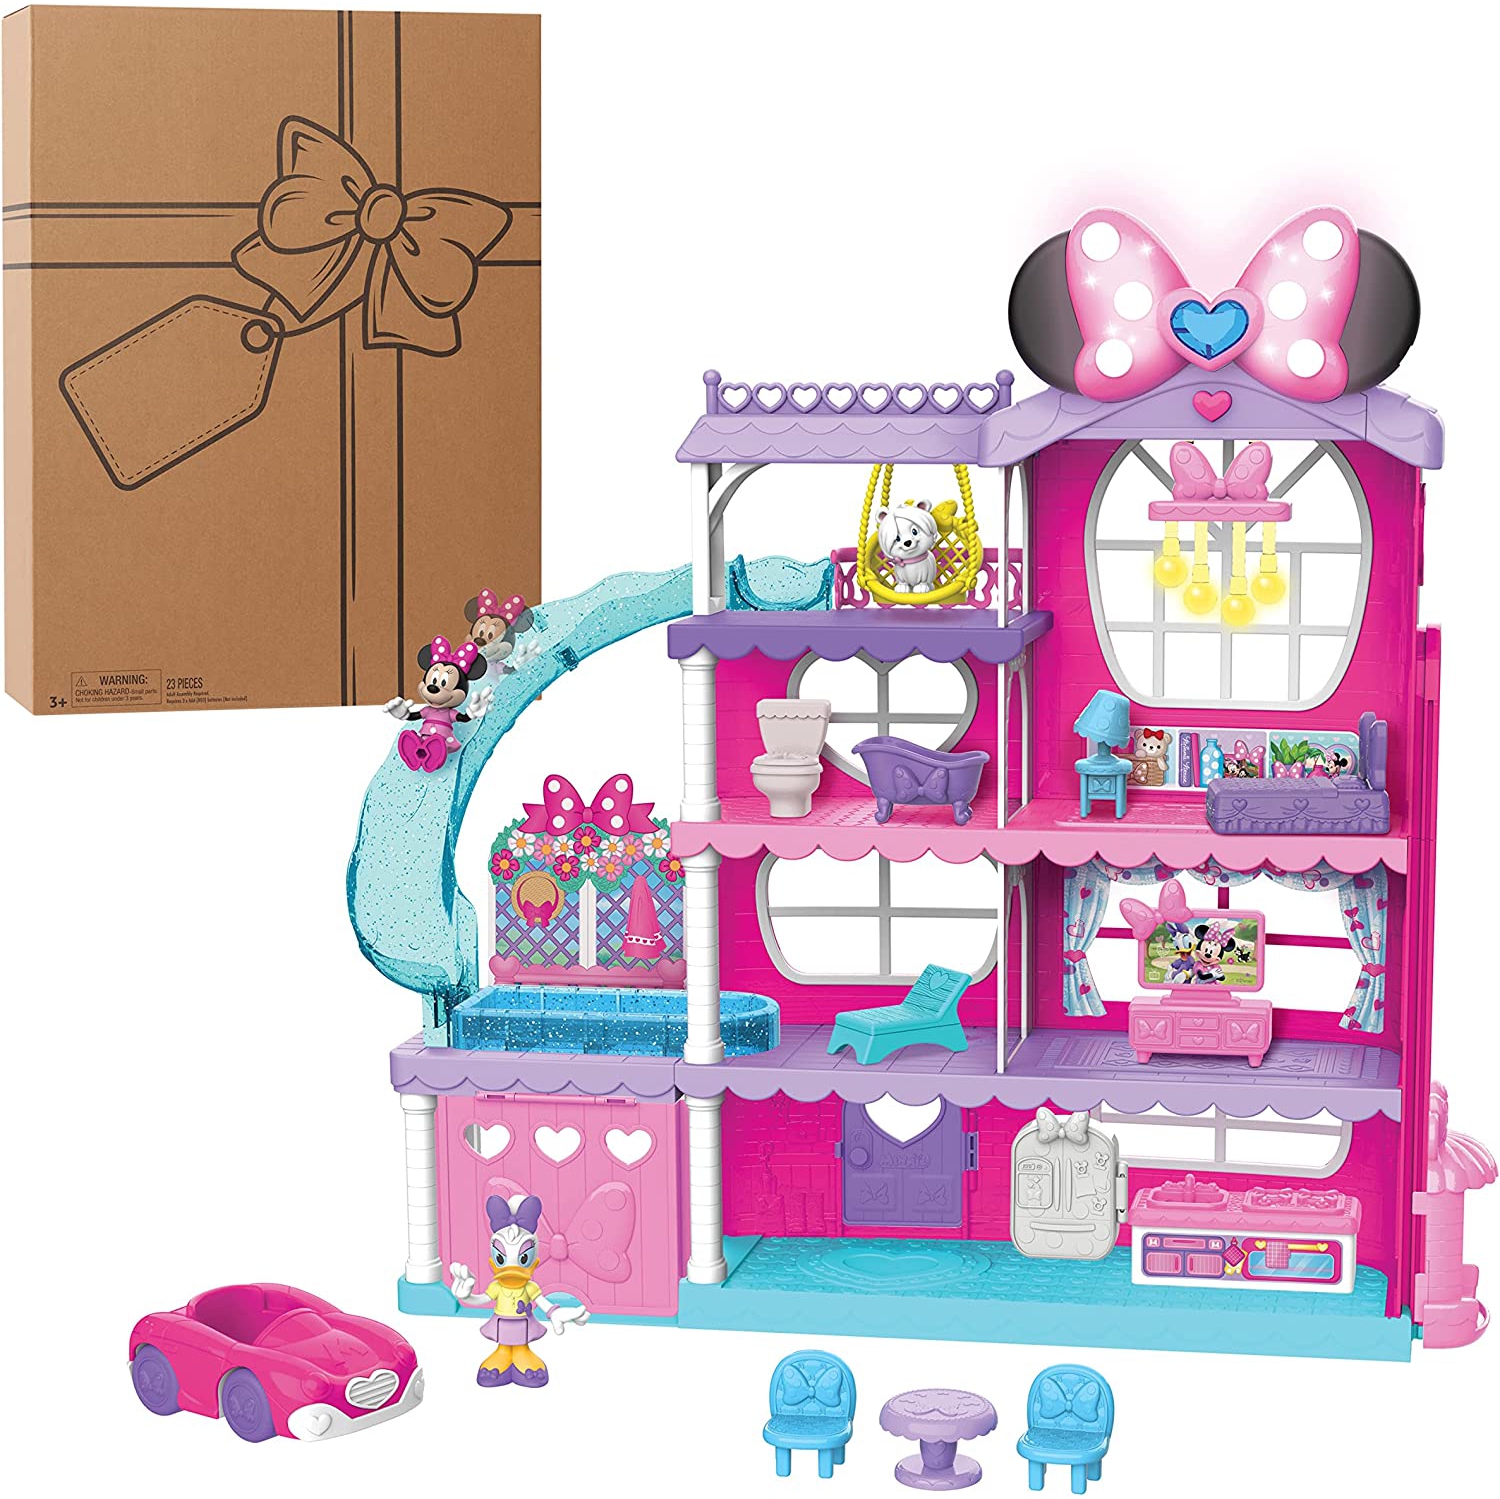 NEW 2022 Minnie Mouse Ultimate Mansion Playset, Kids Toys for Ages 3 Up